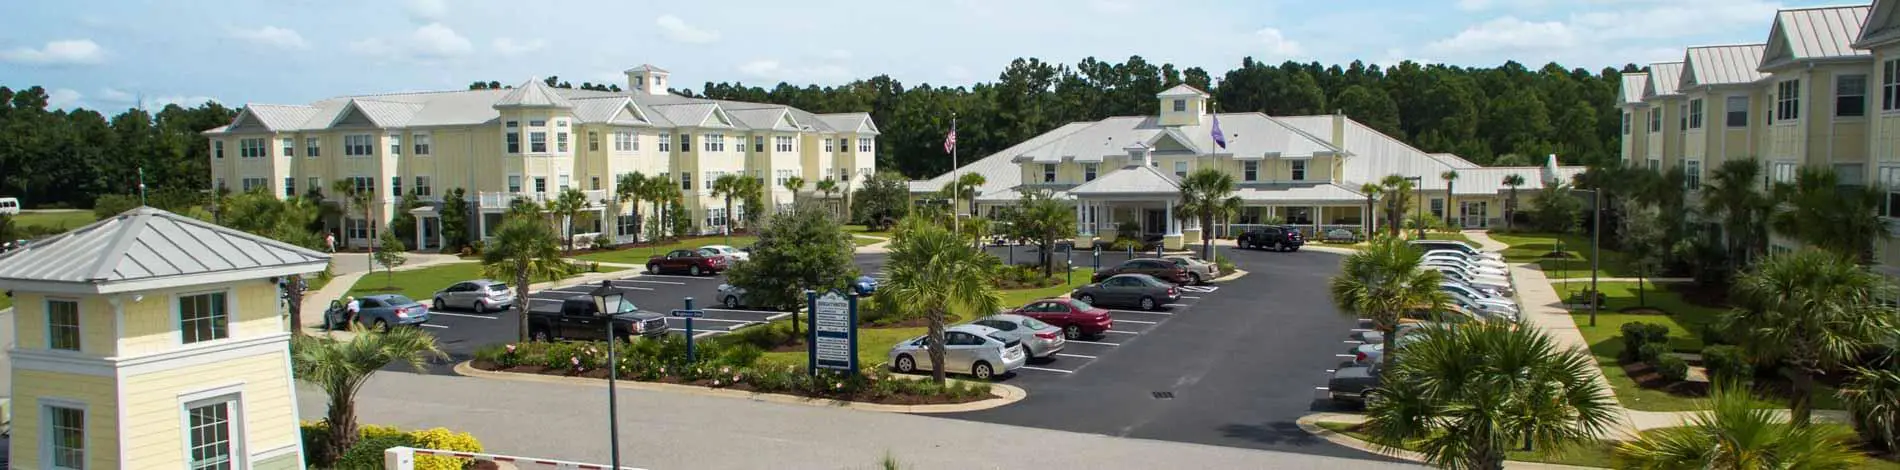 Photo of Brightwater, Assisted Living, Nursing Home, Independent Living, CCRC, Myrtle Beach, SC 1